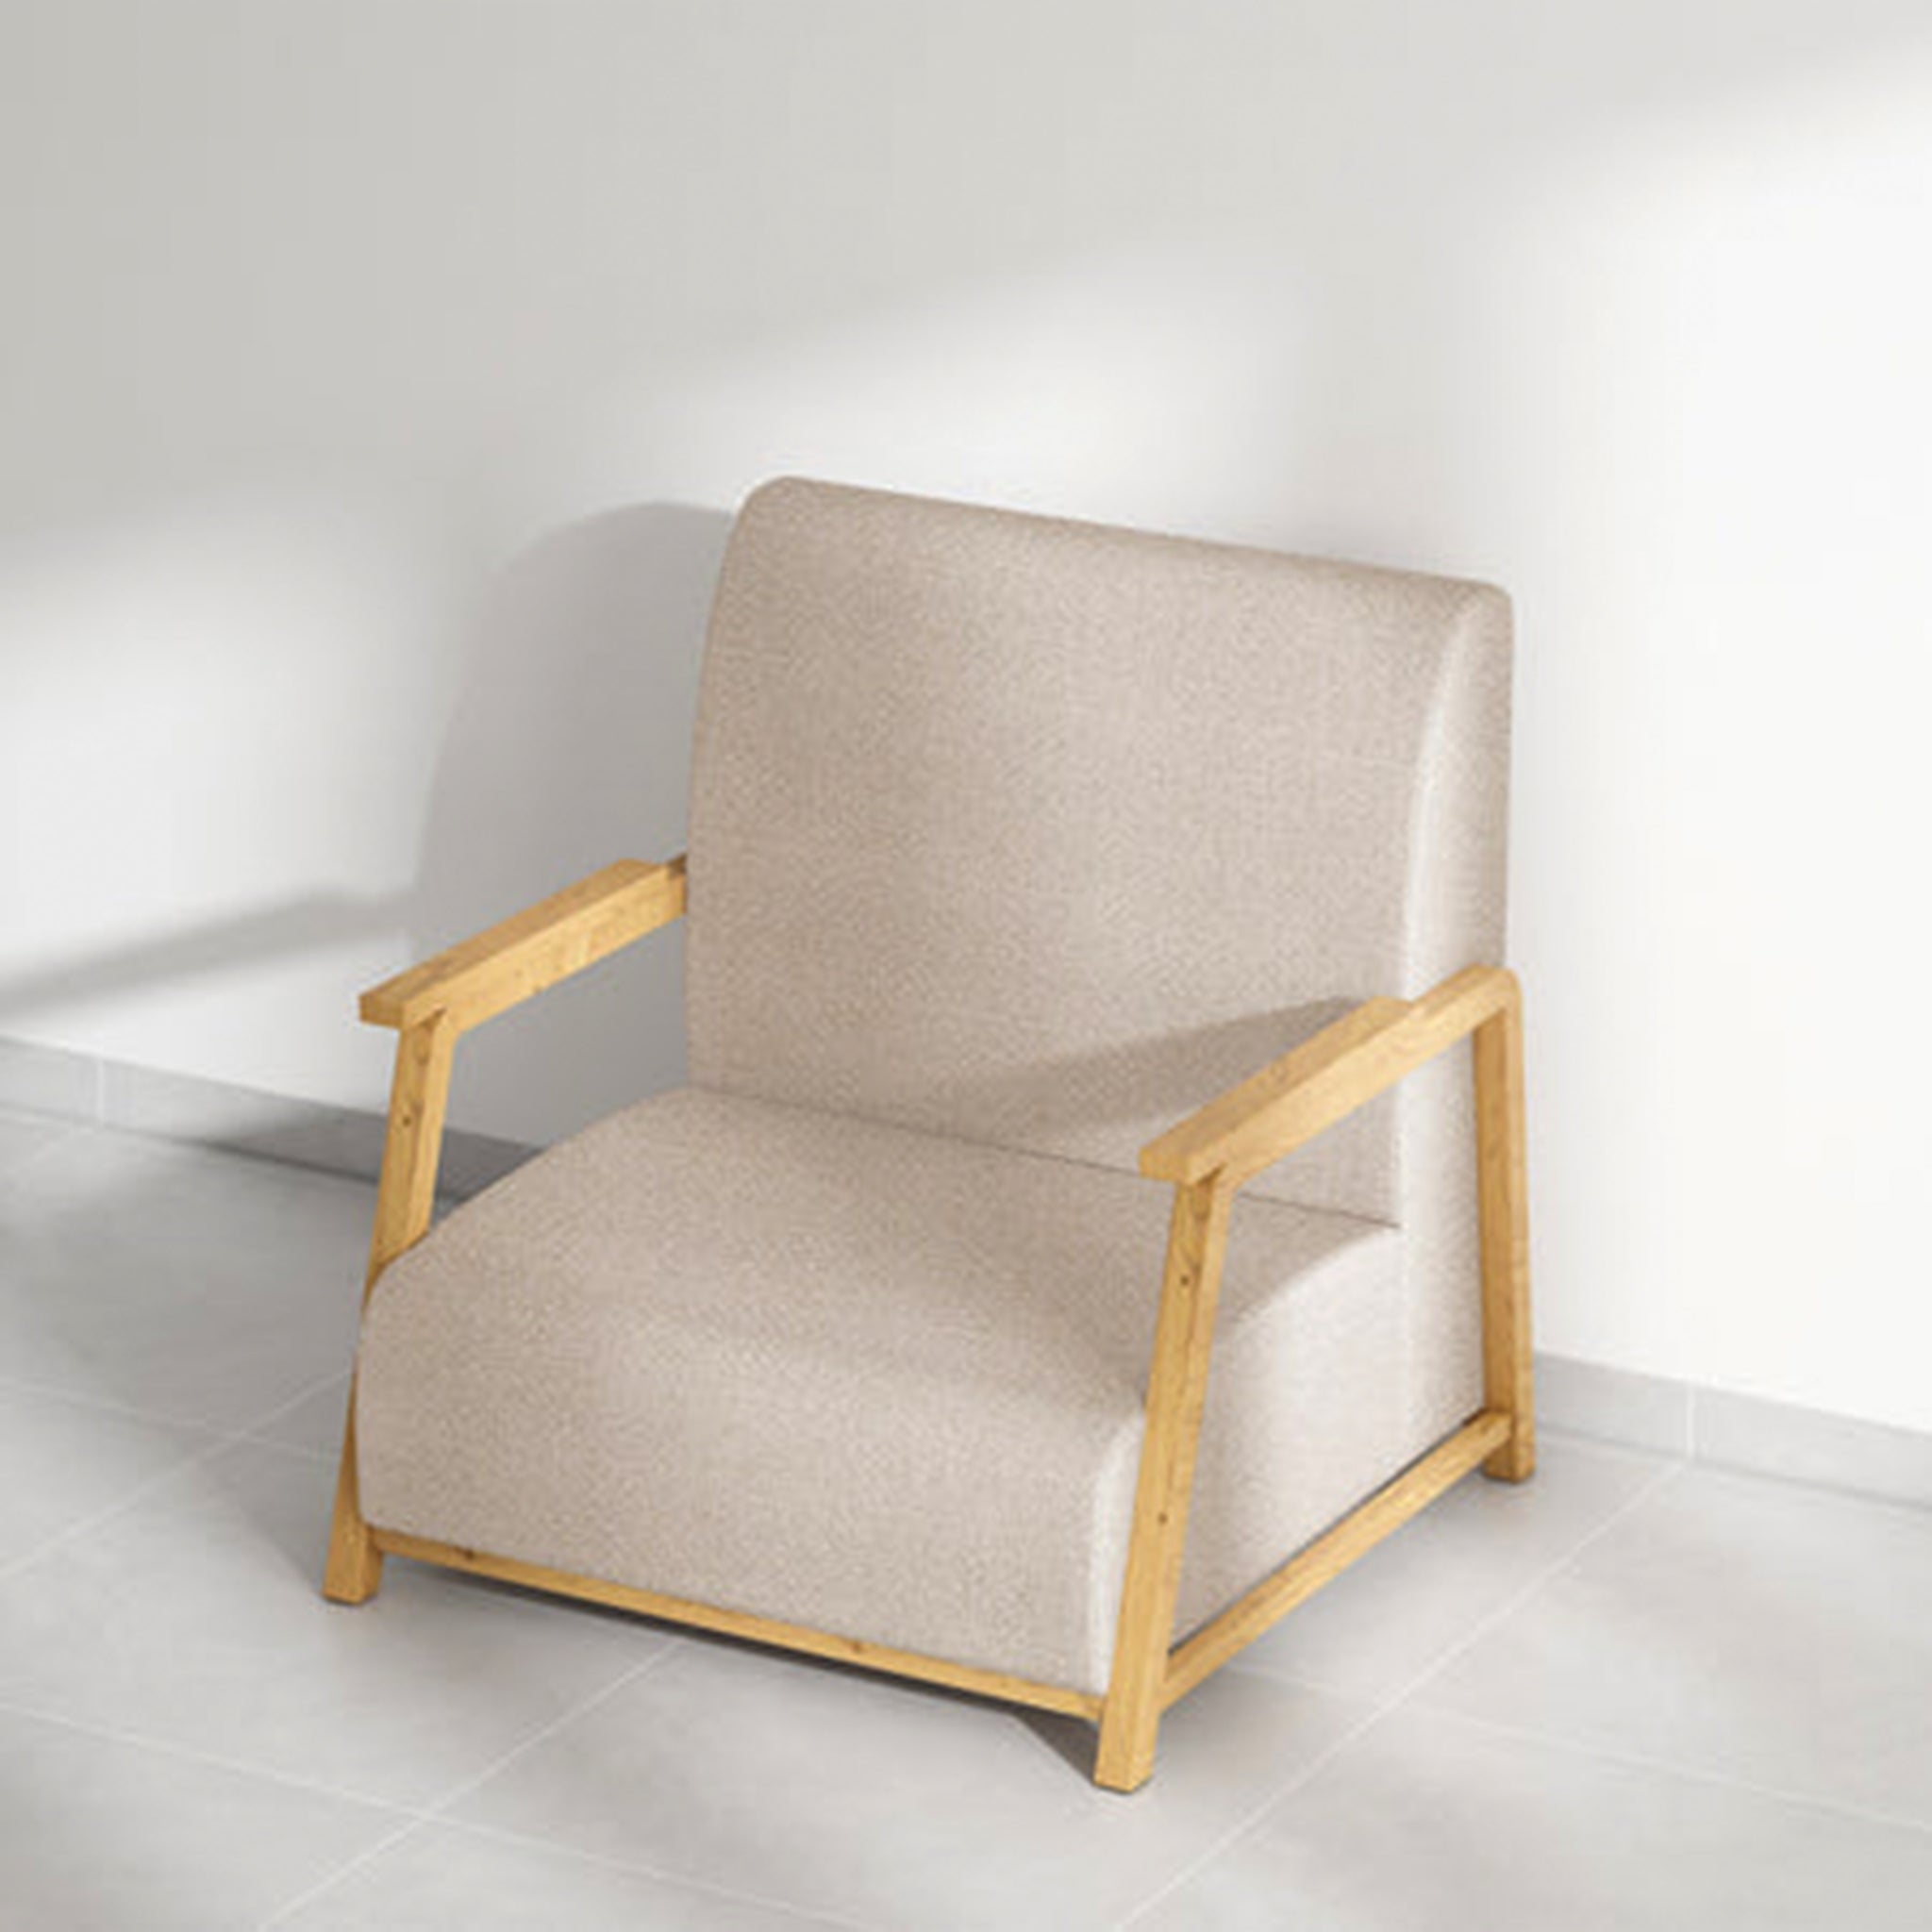 Modern The Dixon Arm Accent Chair with a light and airy design.